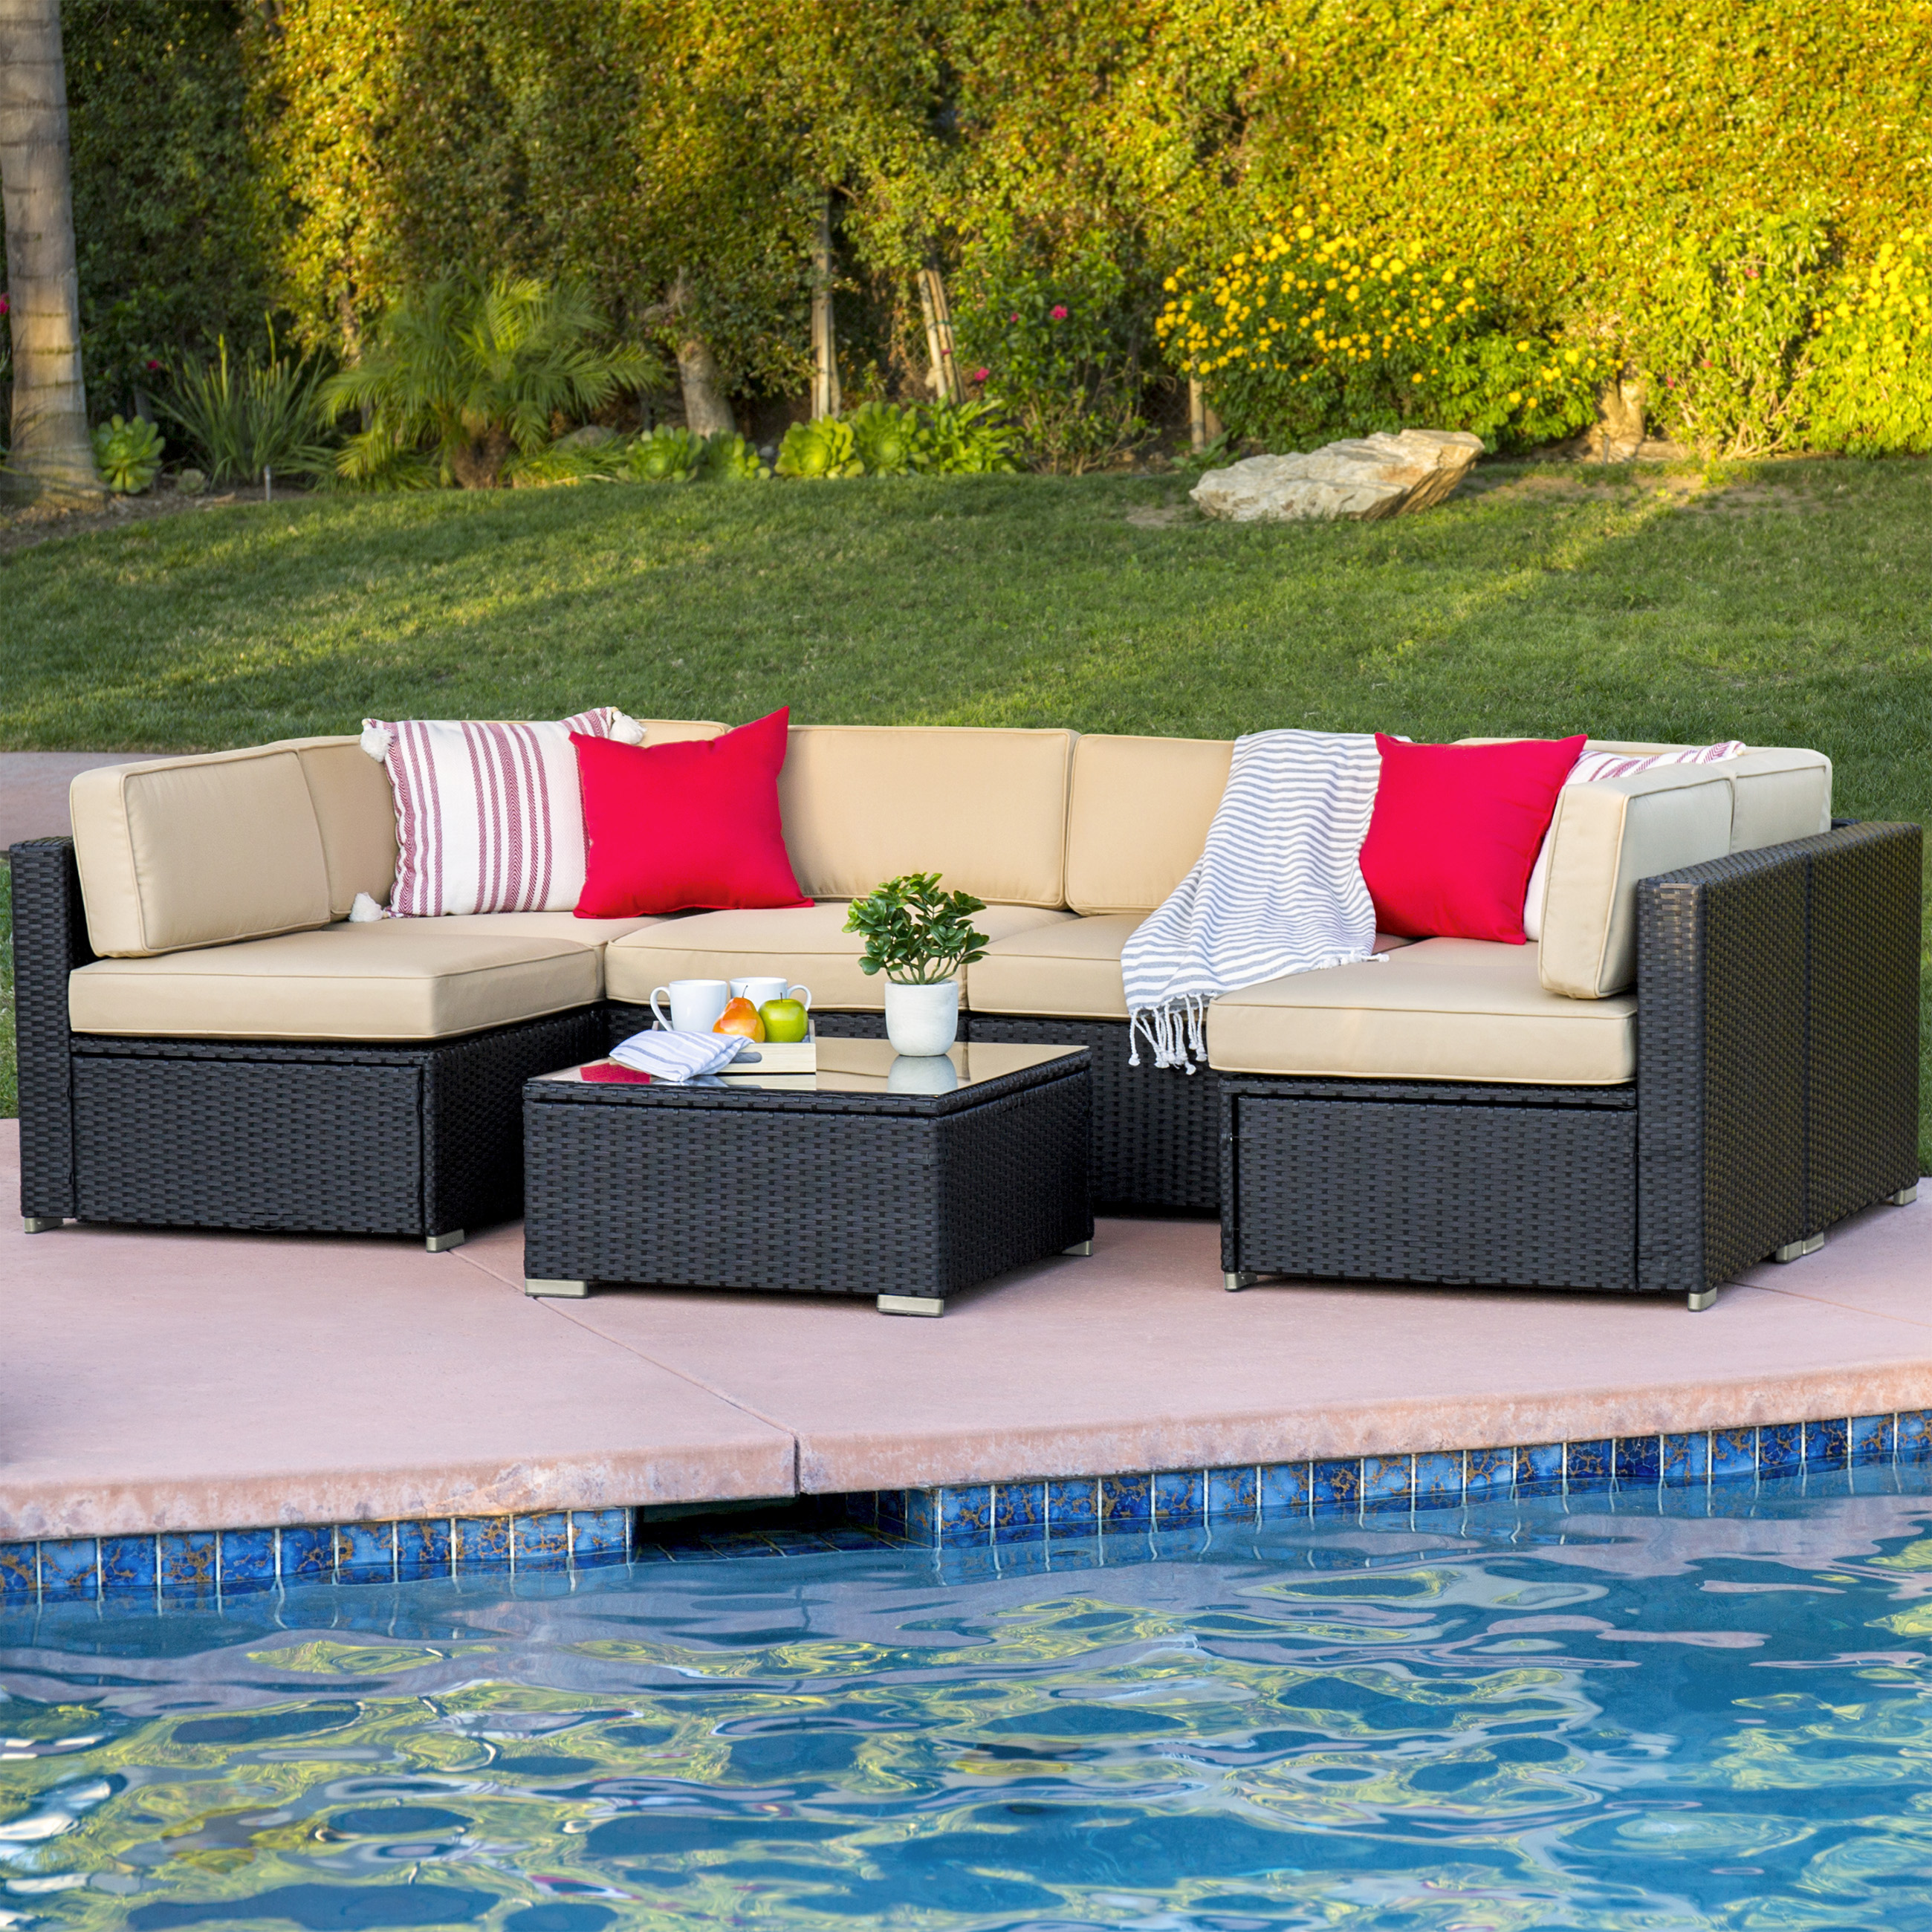 Common uses of outdoor wicker furniture